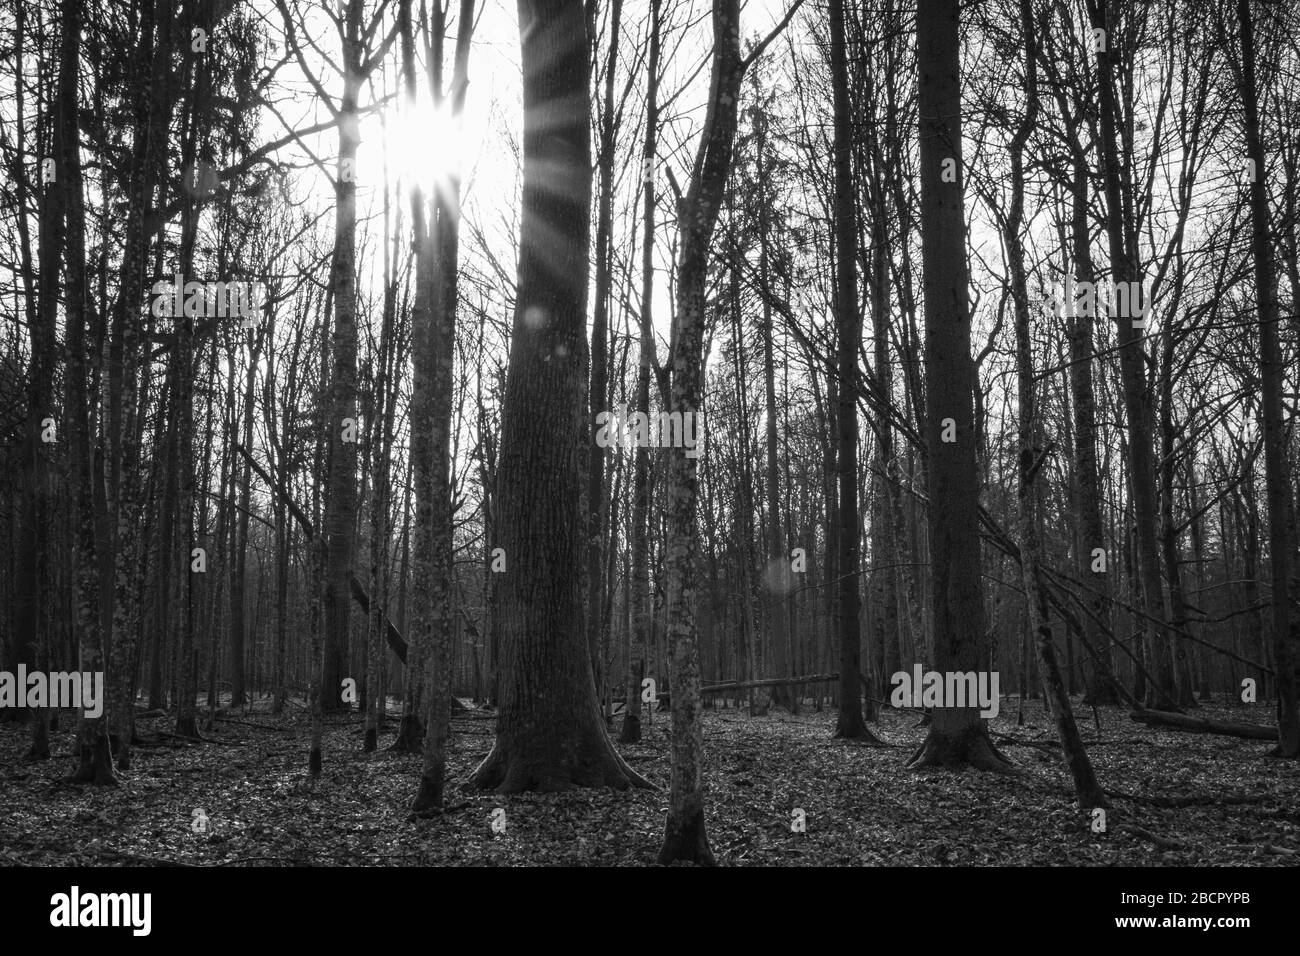 trees with a sunstar in Bialowieza forest, Poland, black & white, evening, lonely atmosphere, Stock Photo